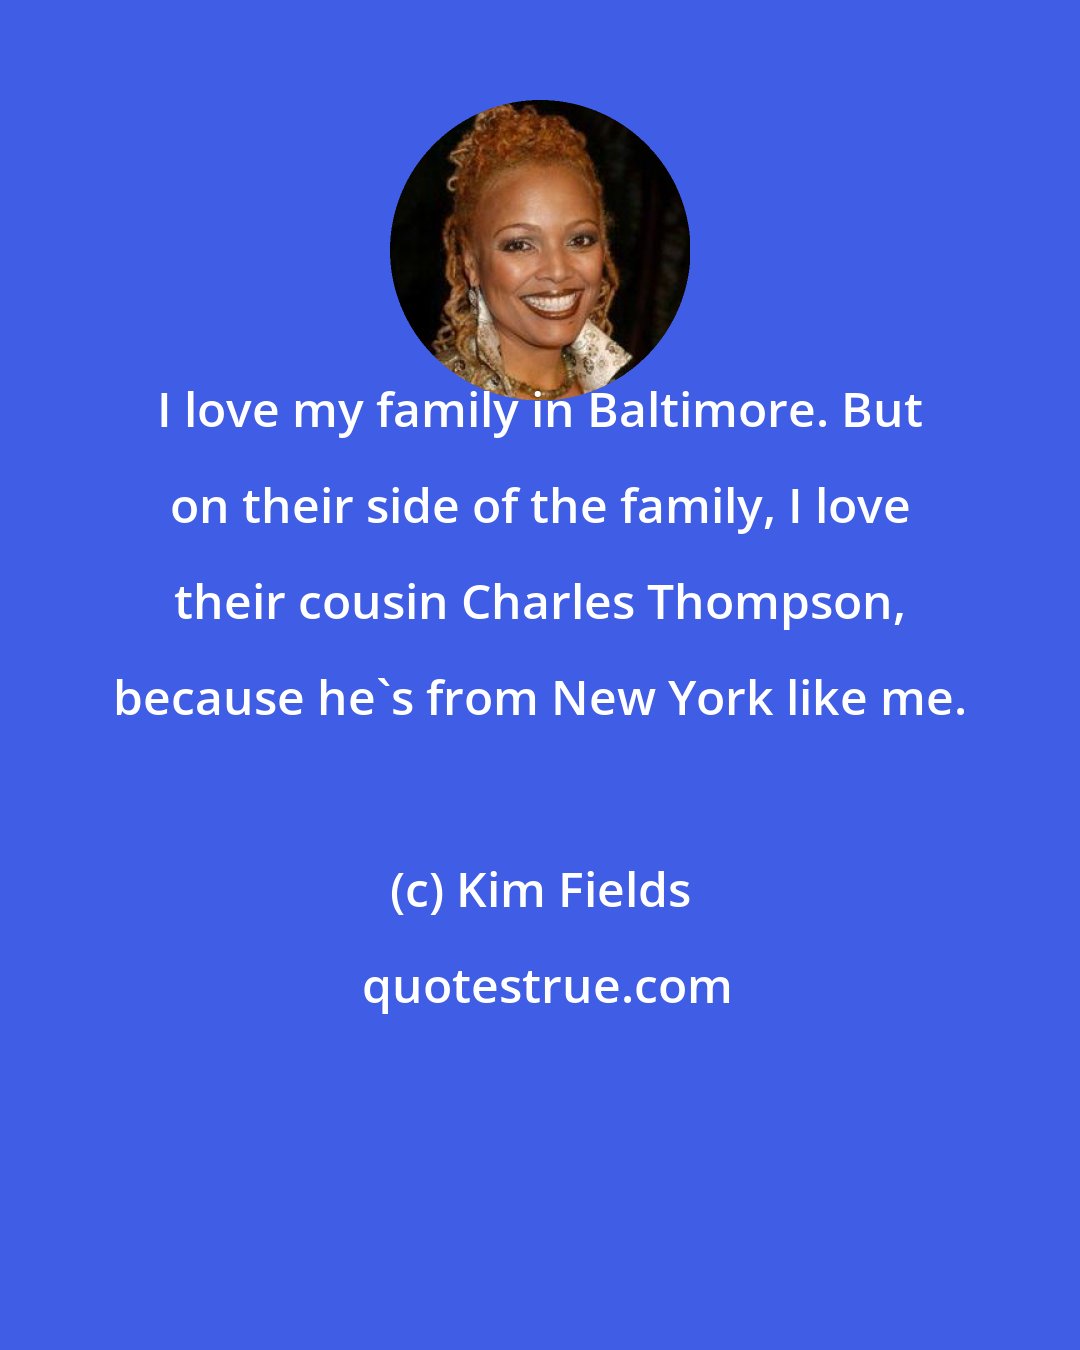 Kim Fields: I love my family in Baltimore. But on their side of the family, I love their cousin Charles Thompson, because he's from New York like me.